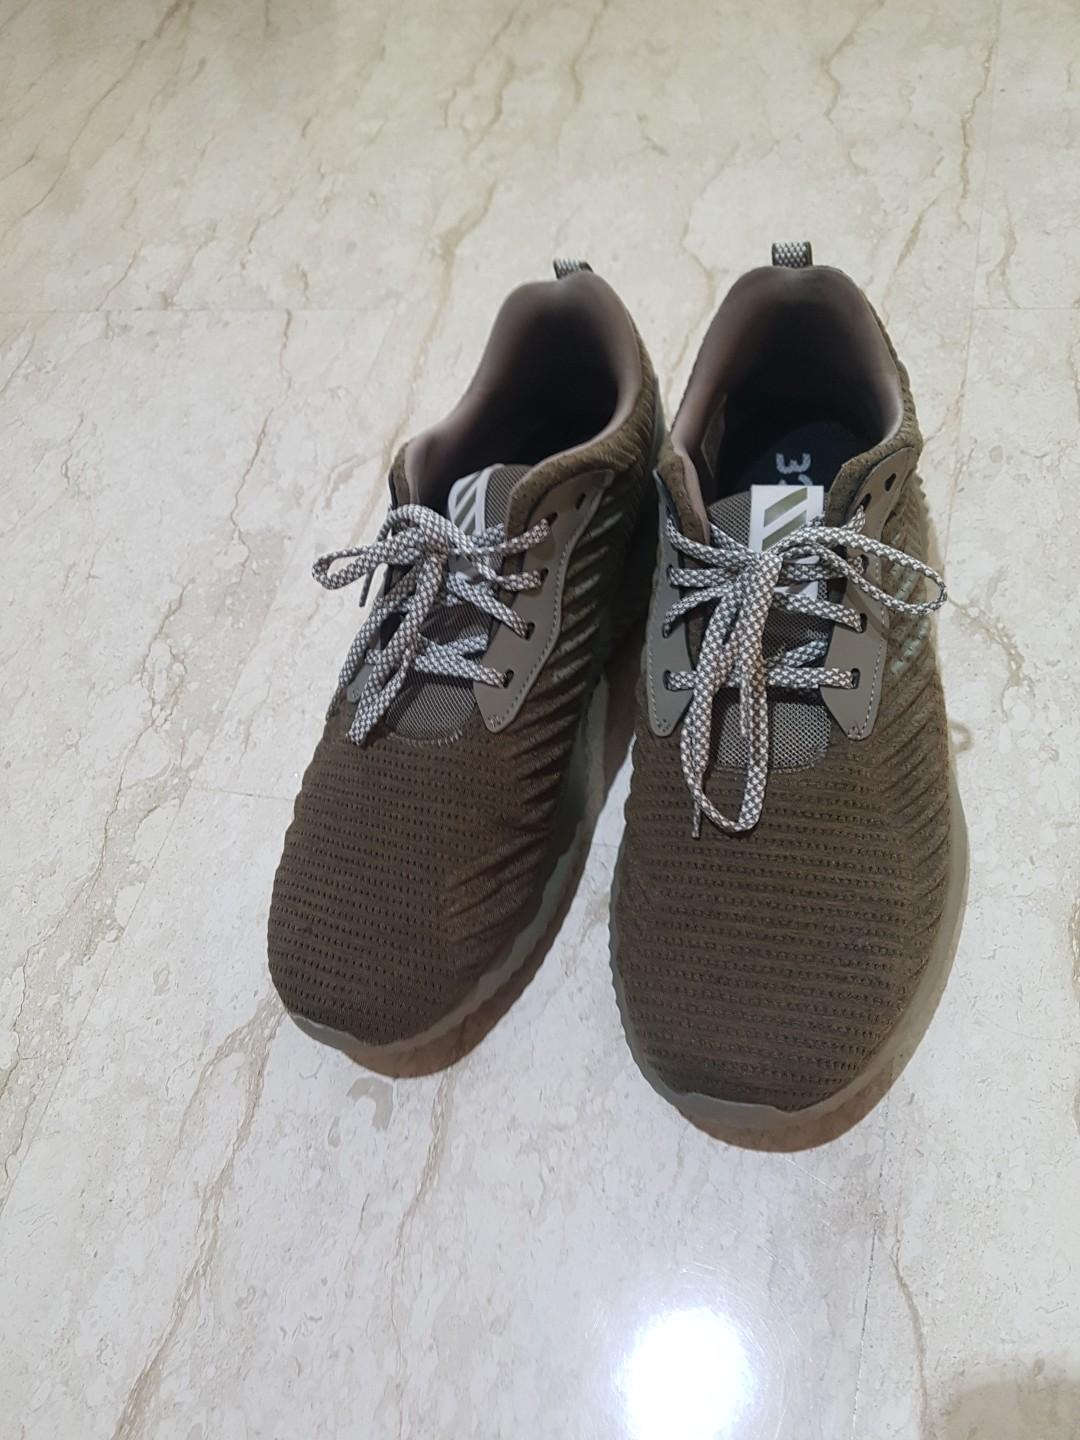 adidas army green shoes